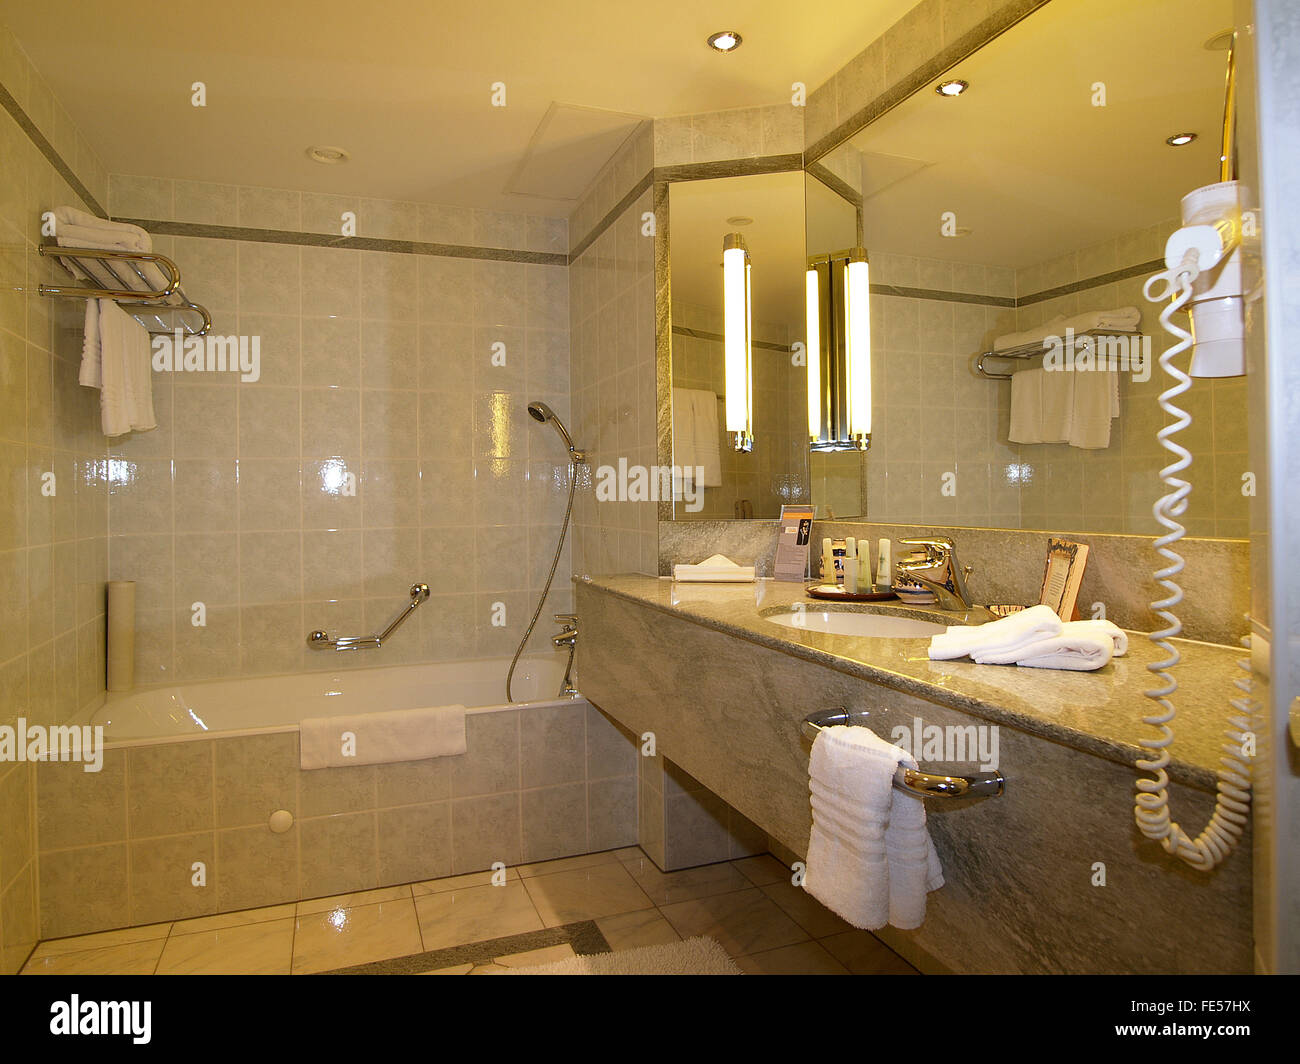 Page 2 - Badewanne High Resolution Stock Photography and Images - Alamy